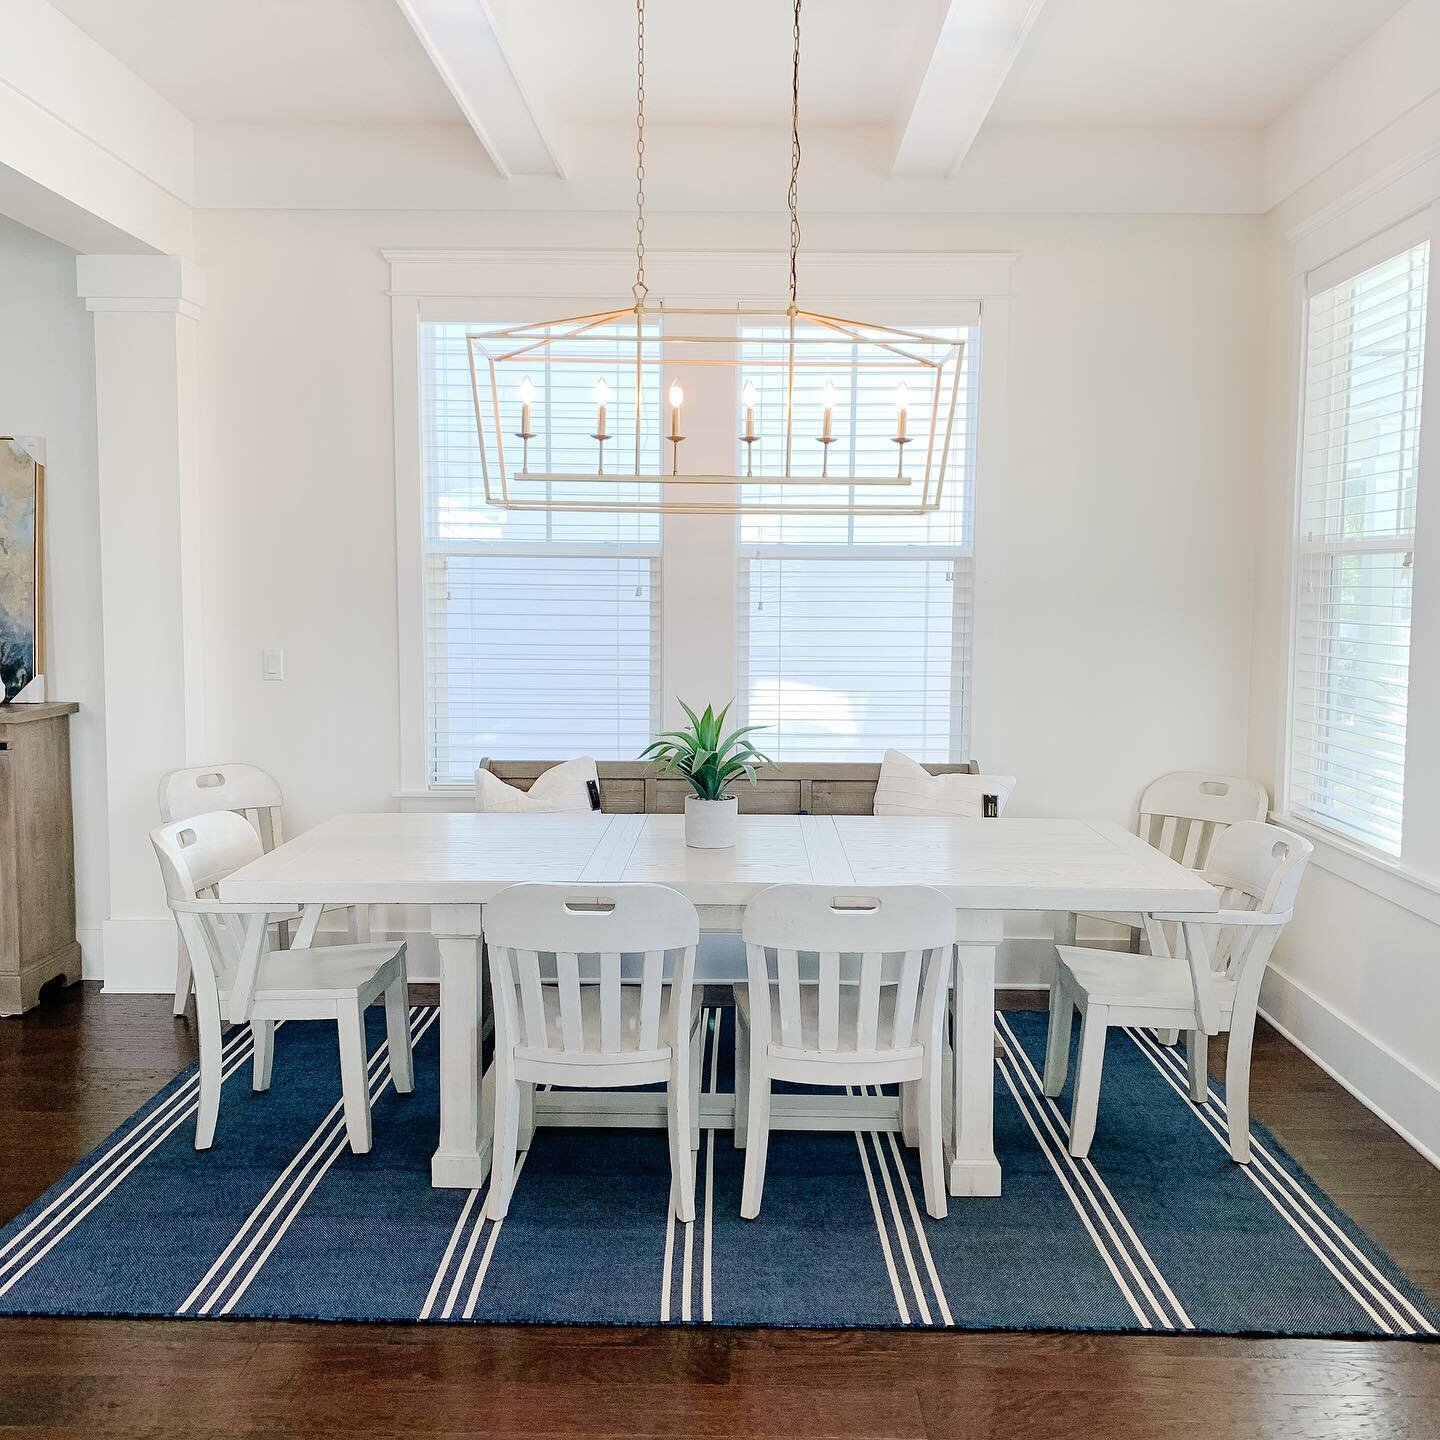 ✨BEFORE + AFTER ✨
My first 30A project from afar is almost complete! Here is the dining room space - we had all the walls go from a tan to white, new warm toned light fixture and rug and furniture to give it a beachy fresh feel! 💙 🤍💙 swipe to see 